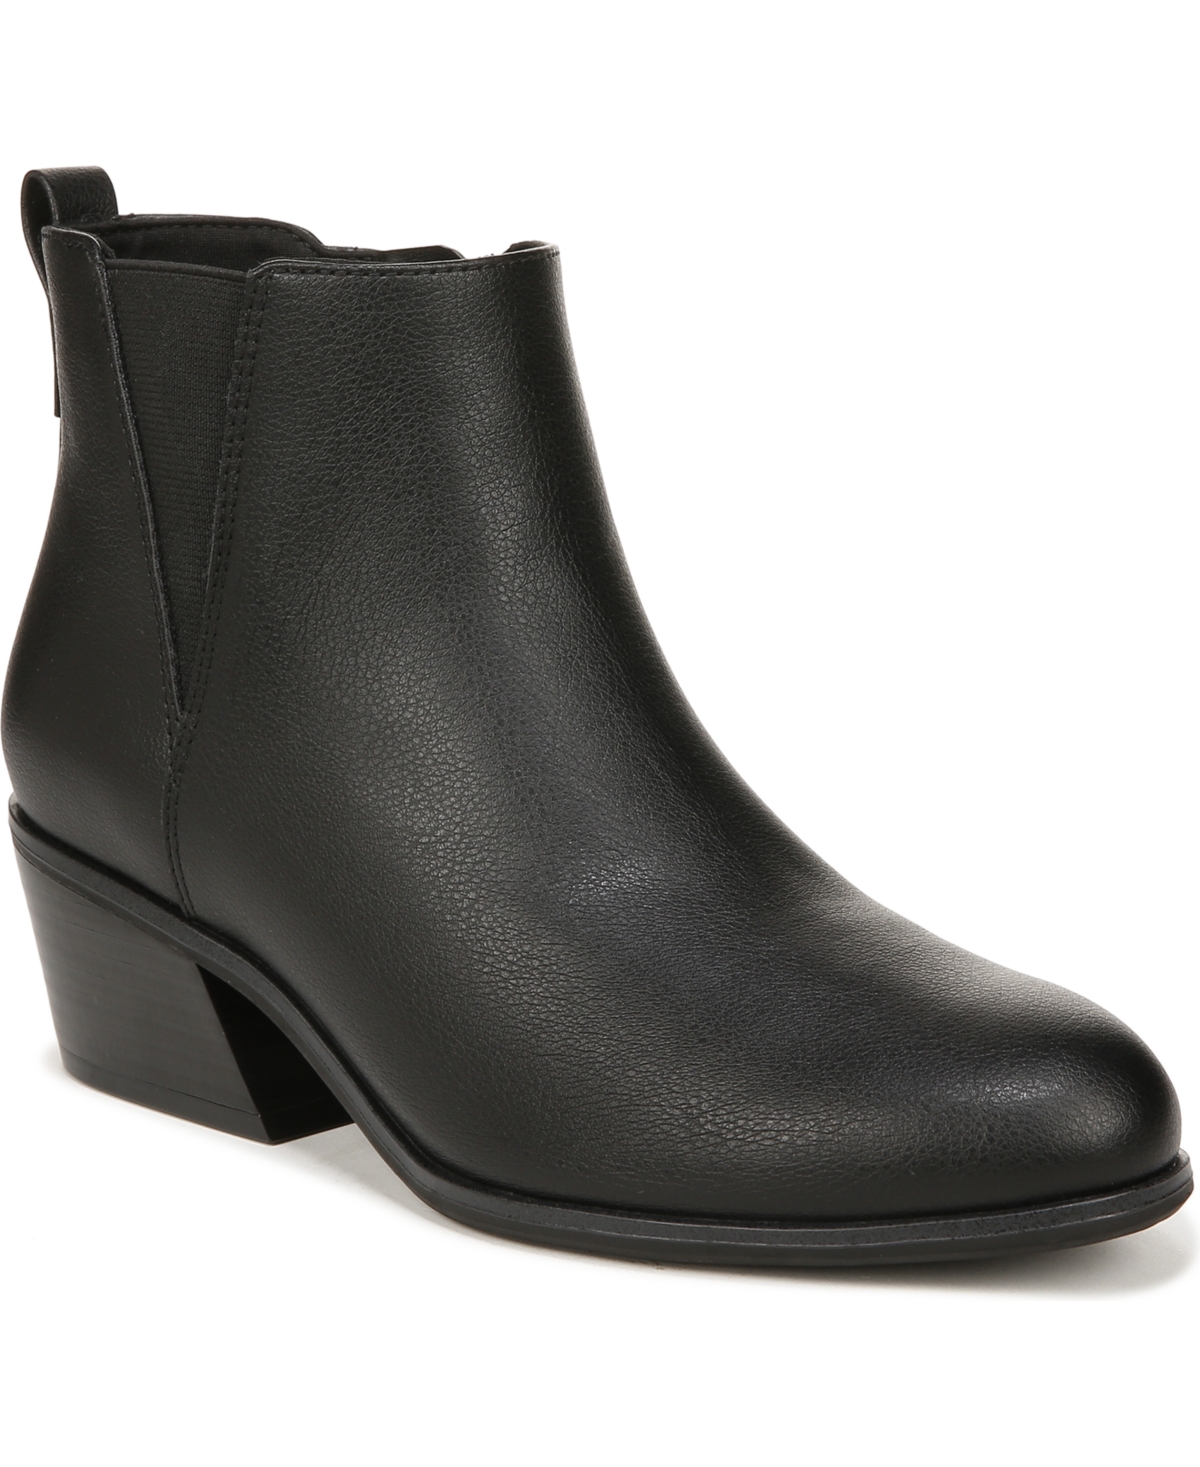 Dr. Scholl's Women's Lacey Booties In Black Faux Leather